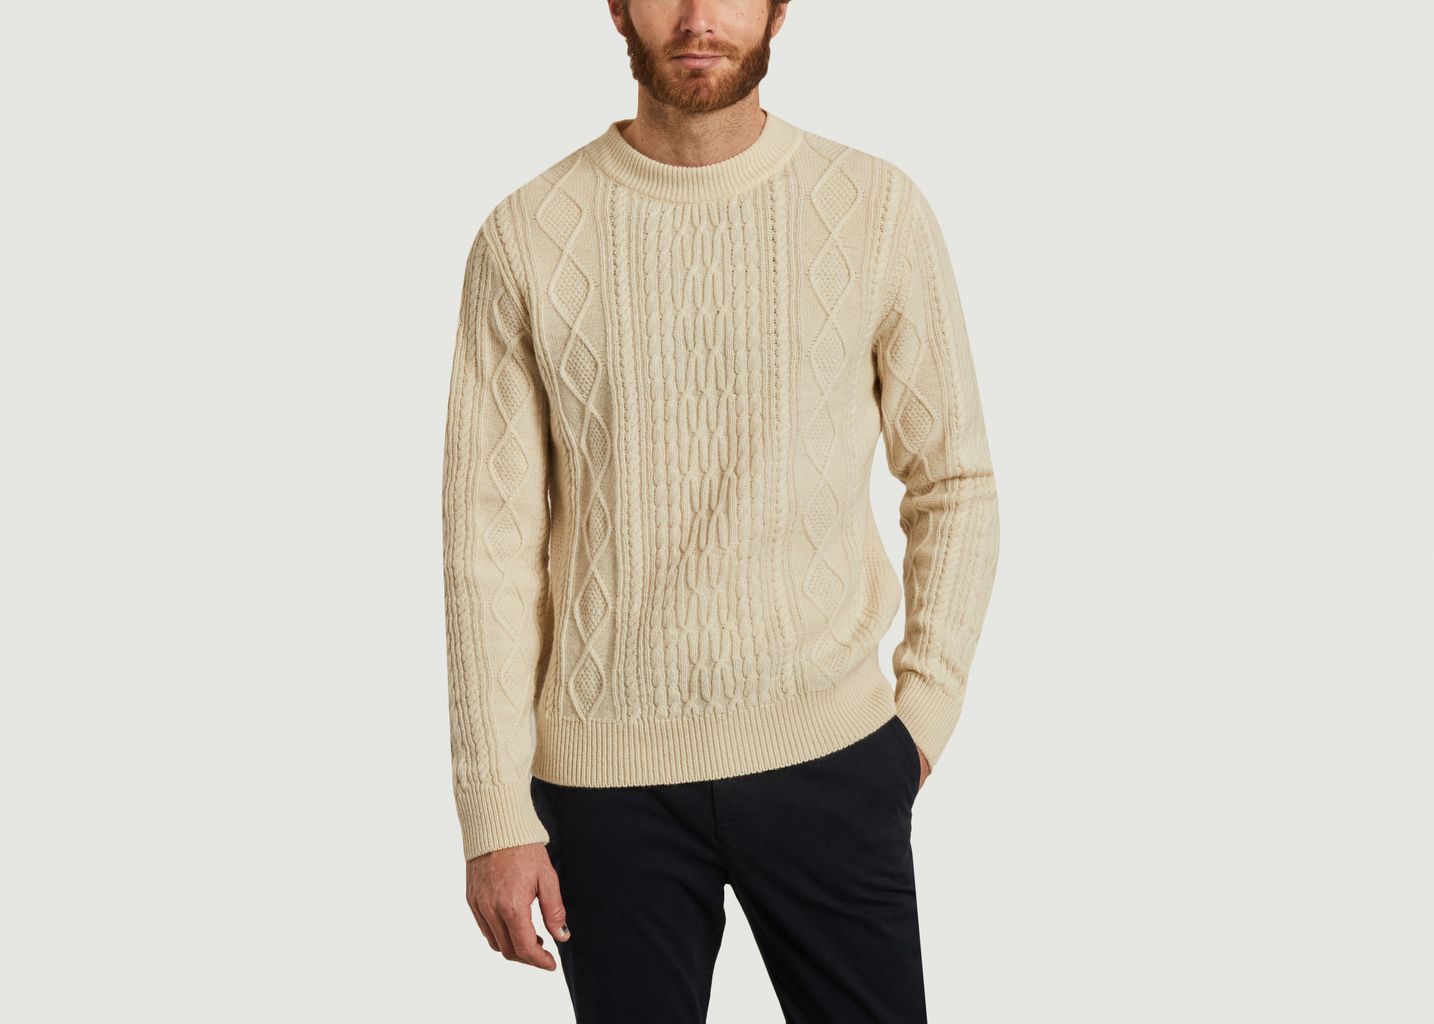 Yard cable knit sweater - Olow